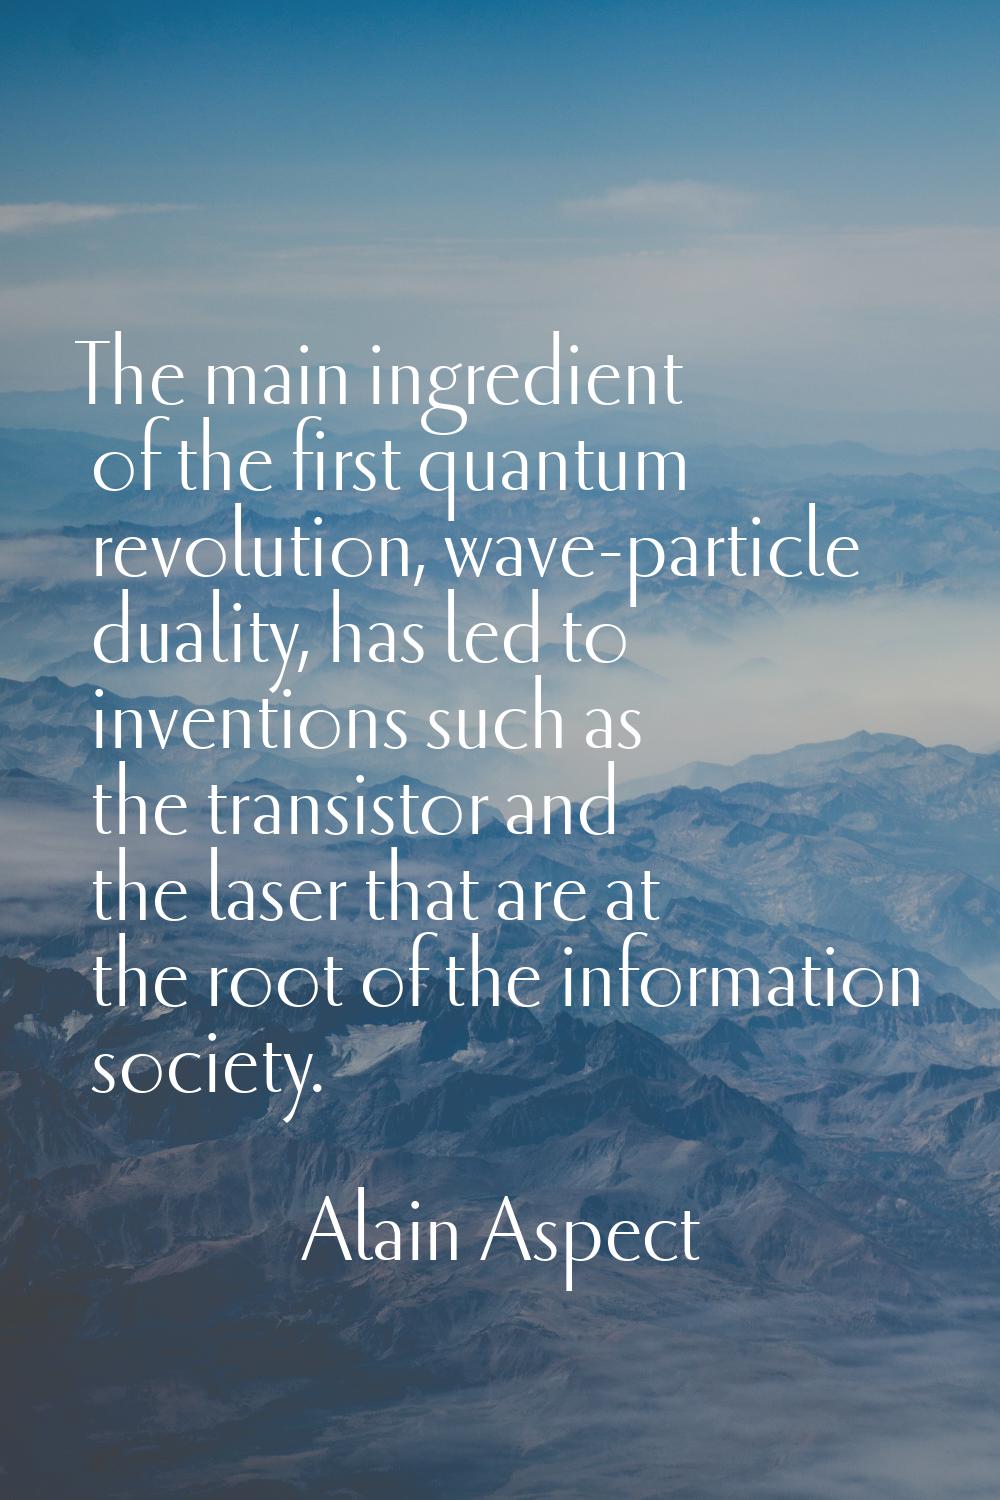 The main ingredient of the first quantum revolution, wave-particle duality, has led to inventions s